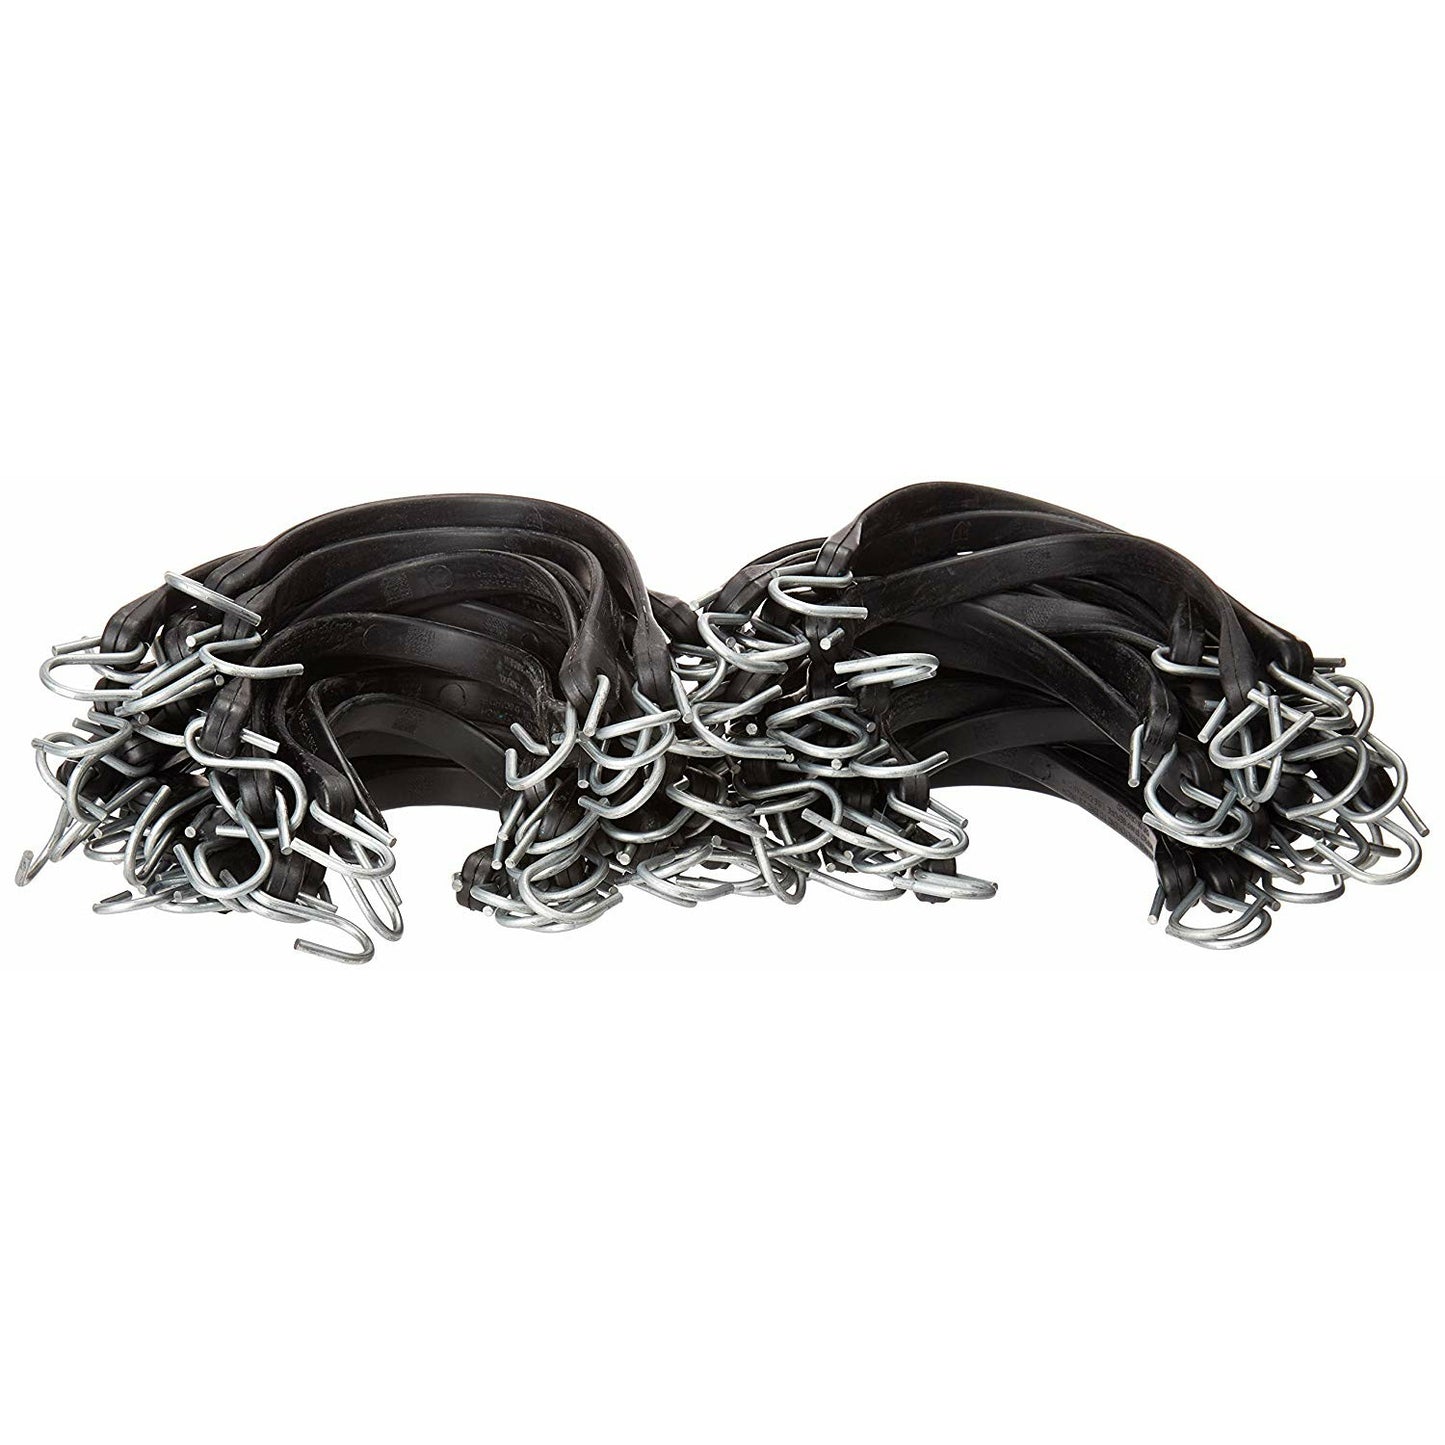 Natural Rubber Bungee Cords - Crimped Hooks